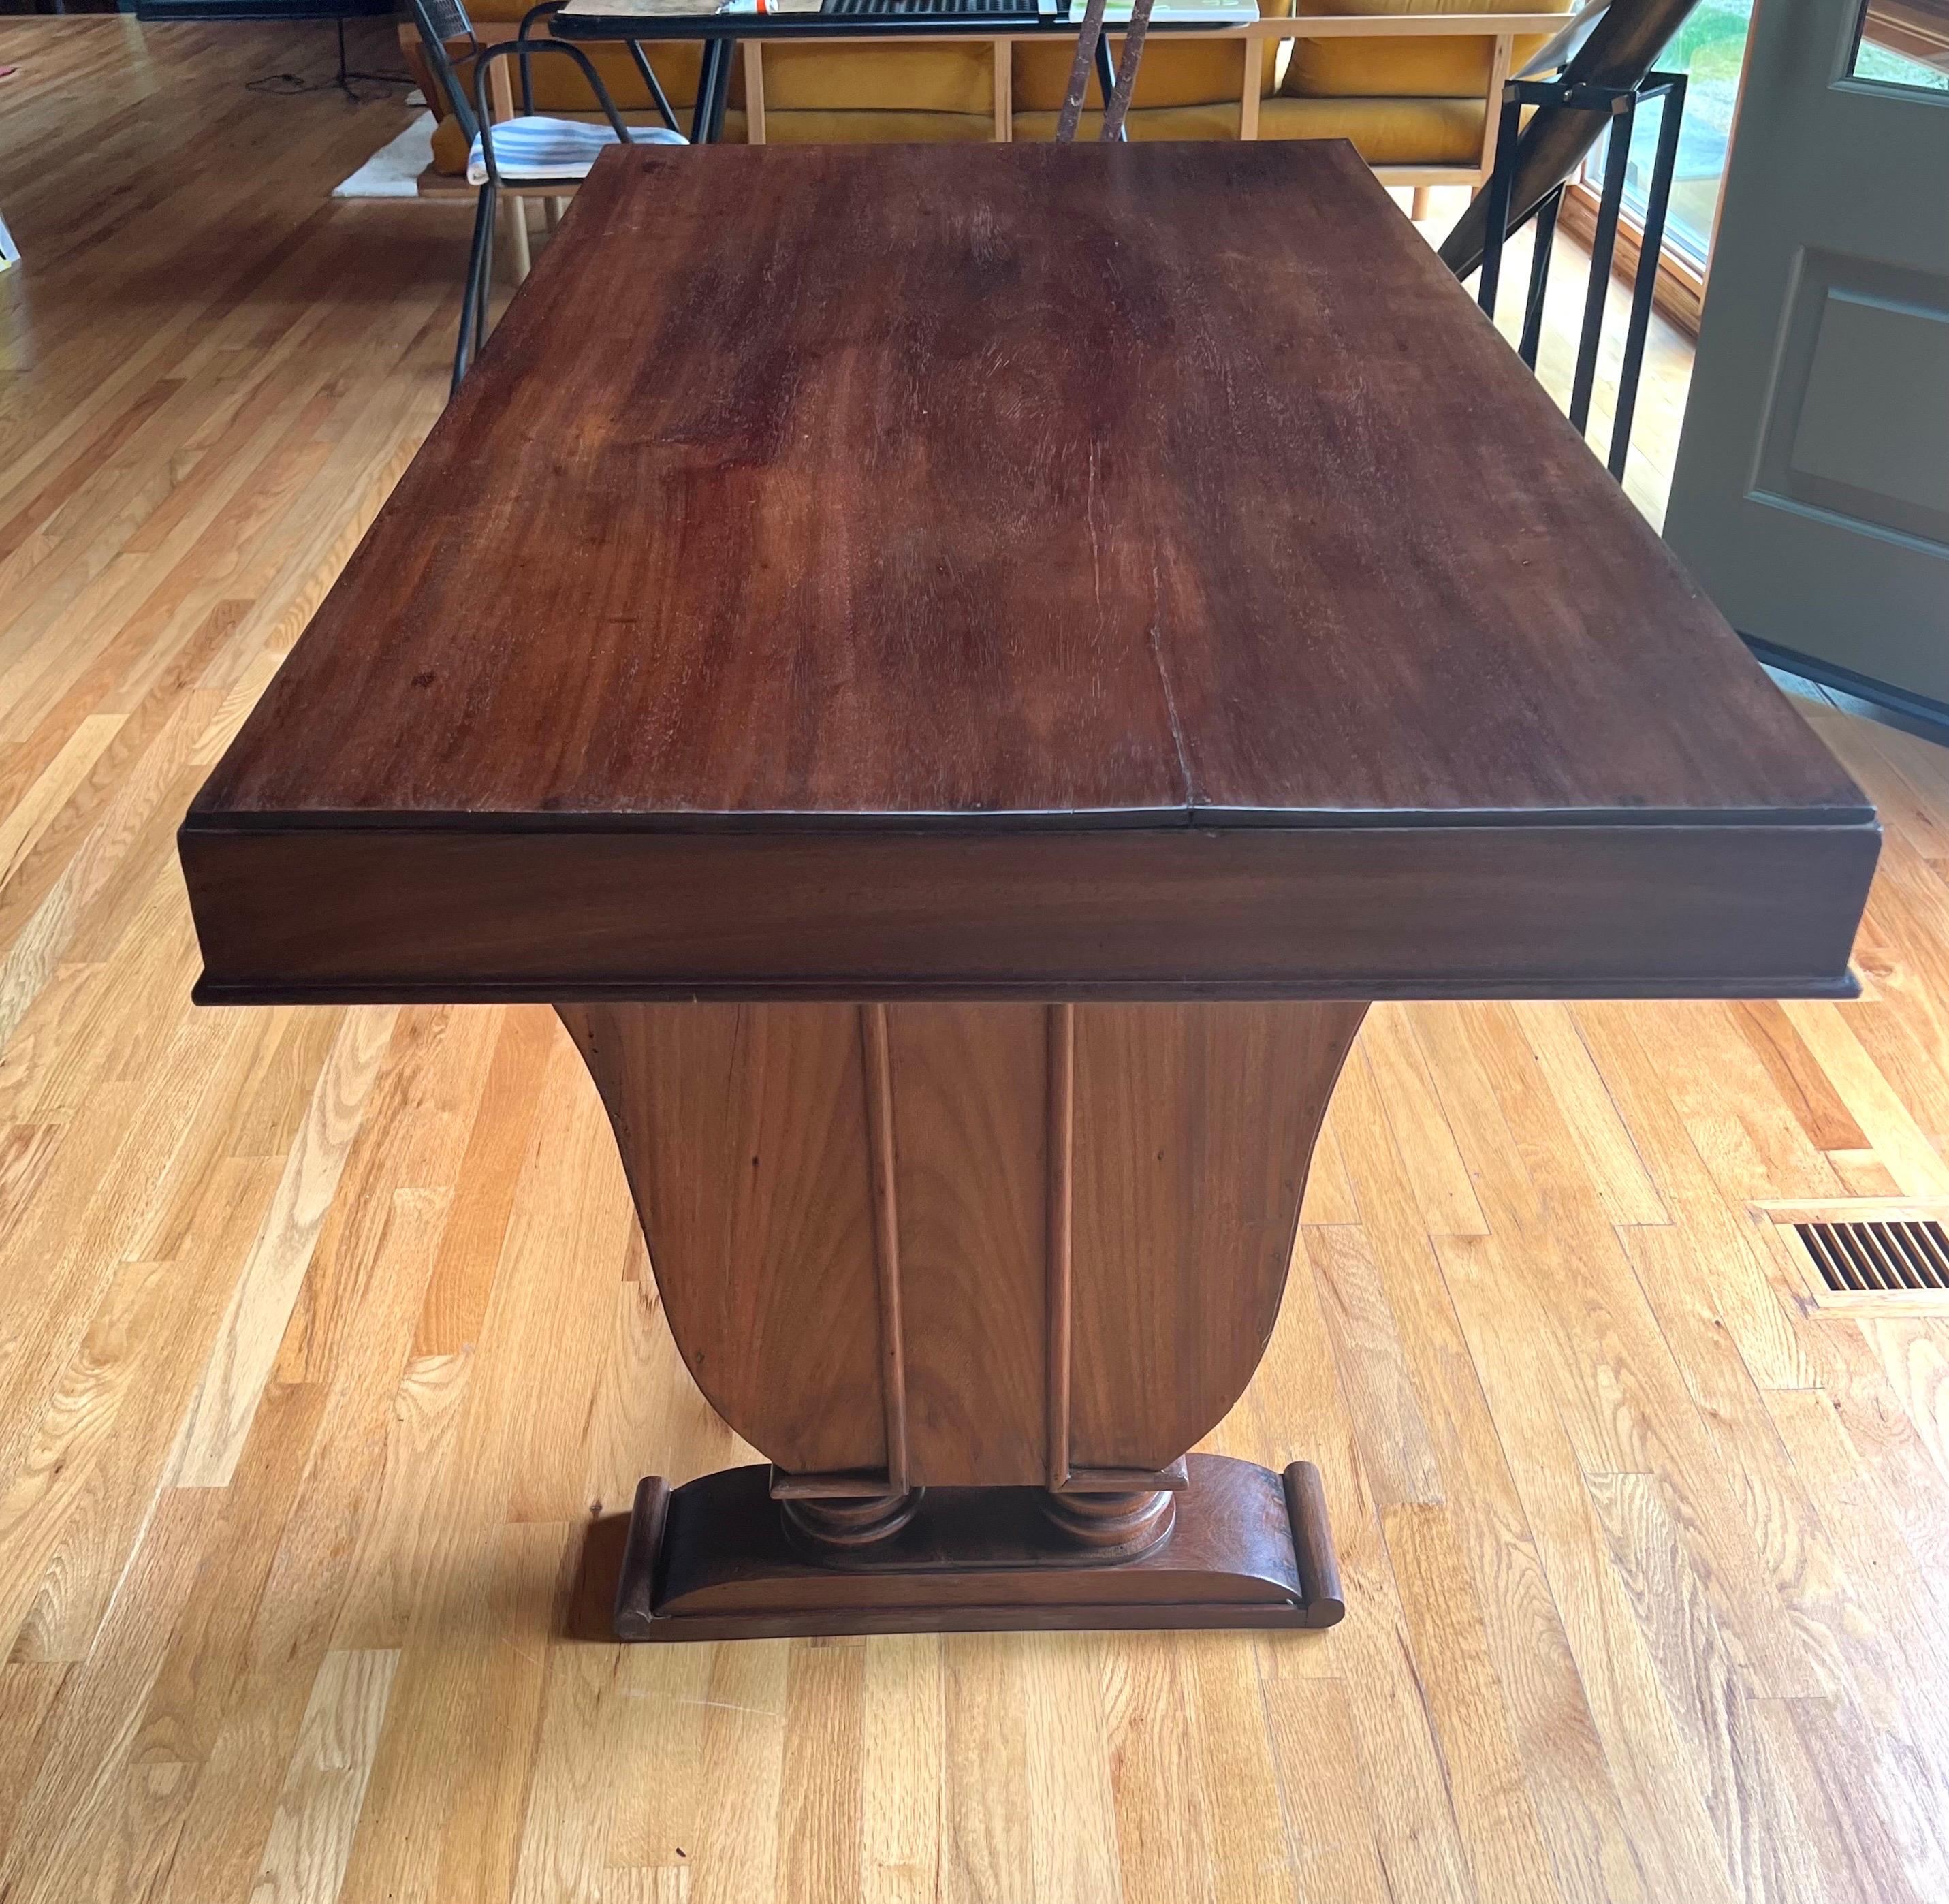 Rare French Art Deco Writing Table / Desk in Teak c. 1925, style of Andre Groult For Sale 6